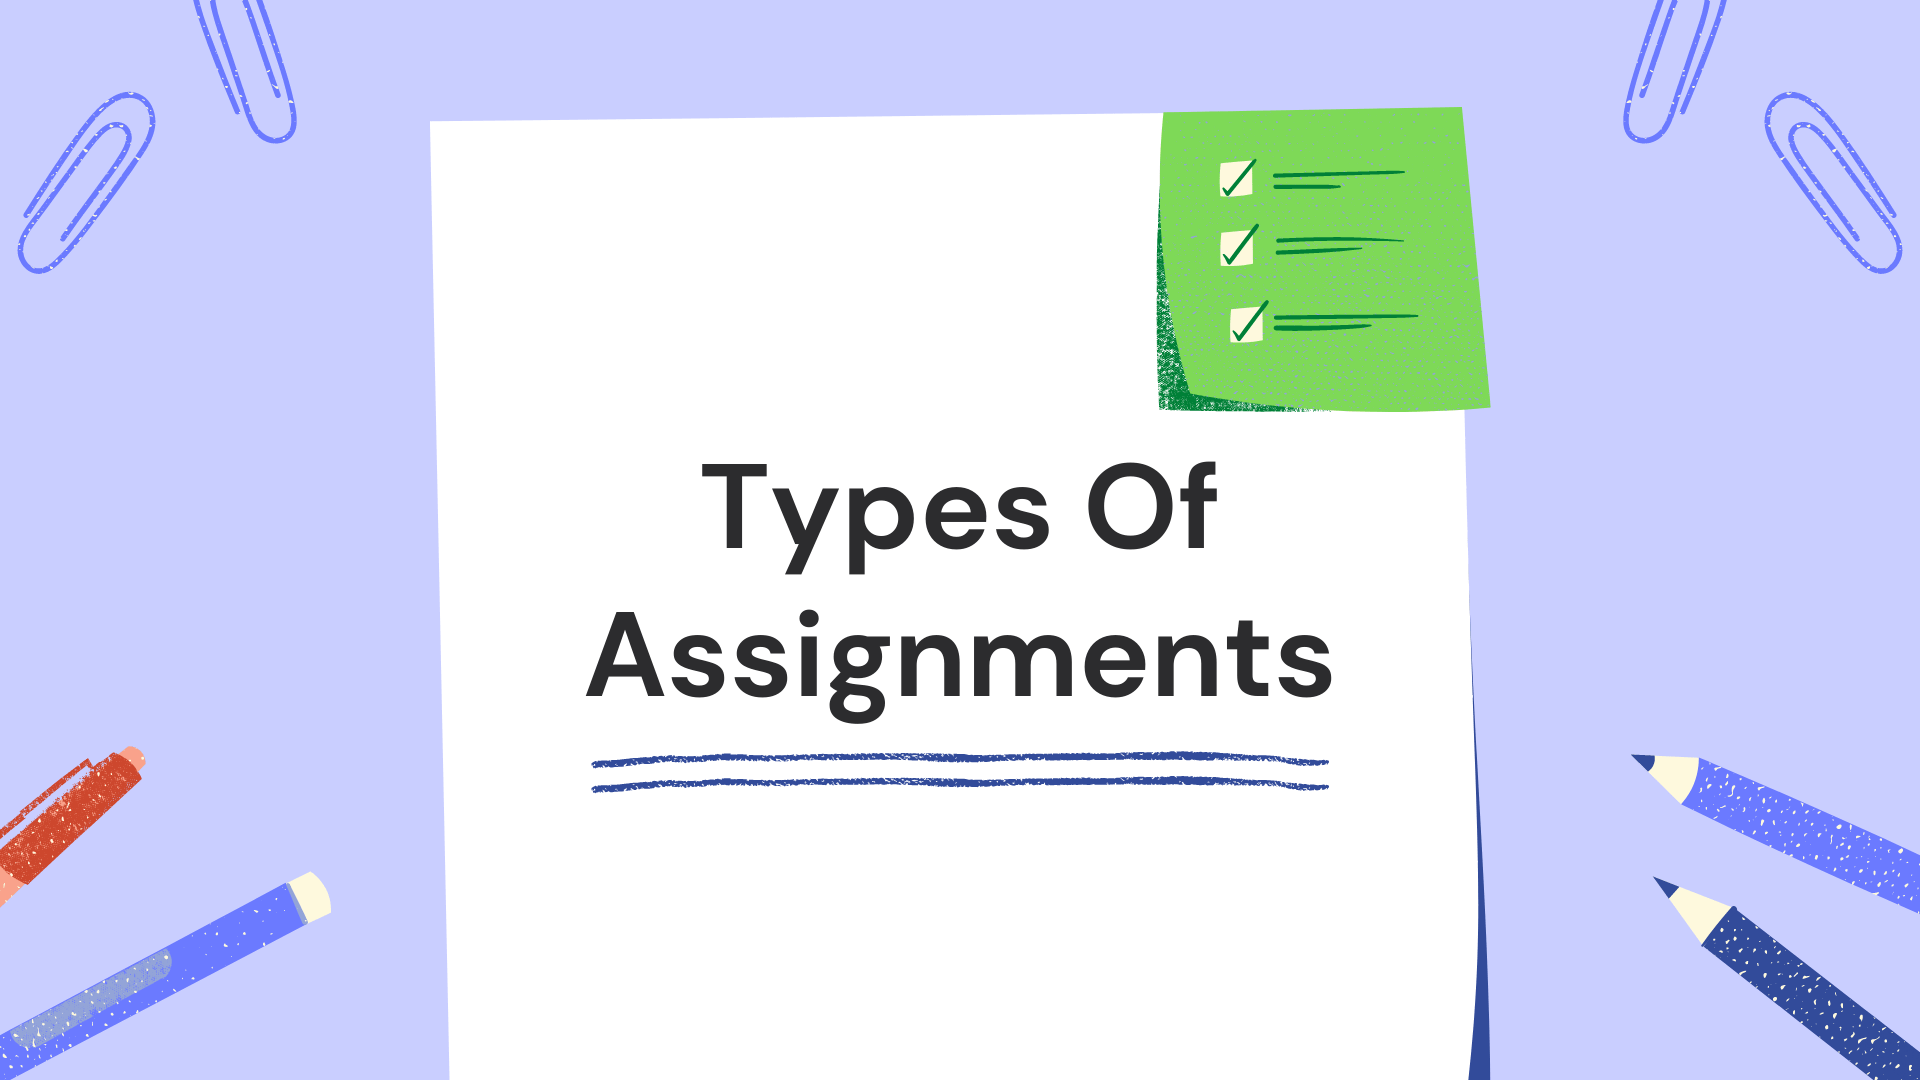 Types Of Assignments